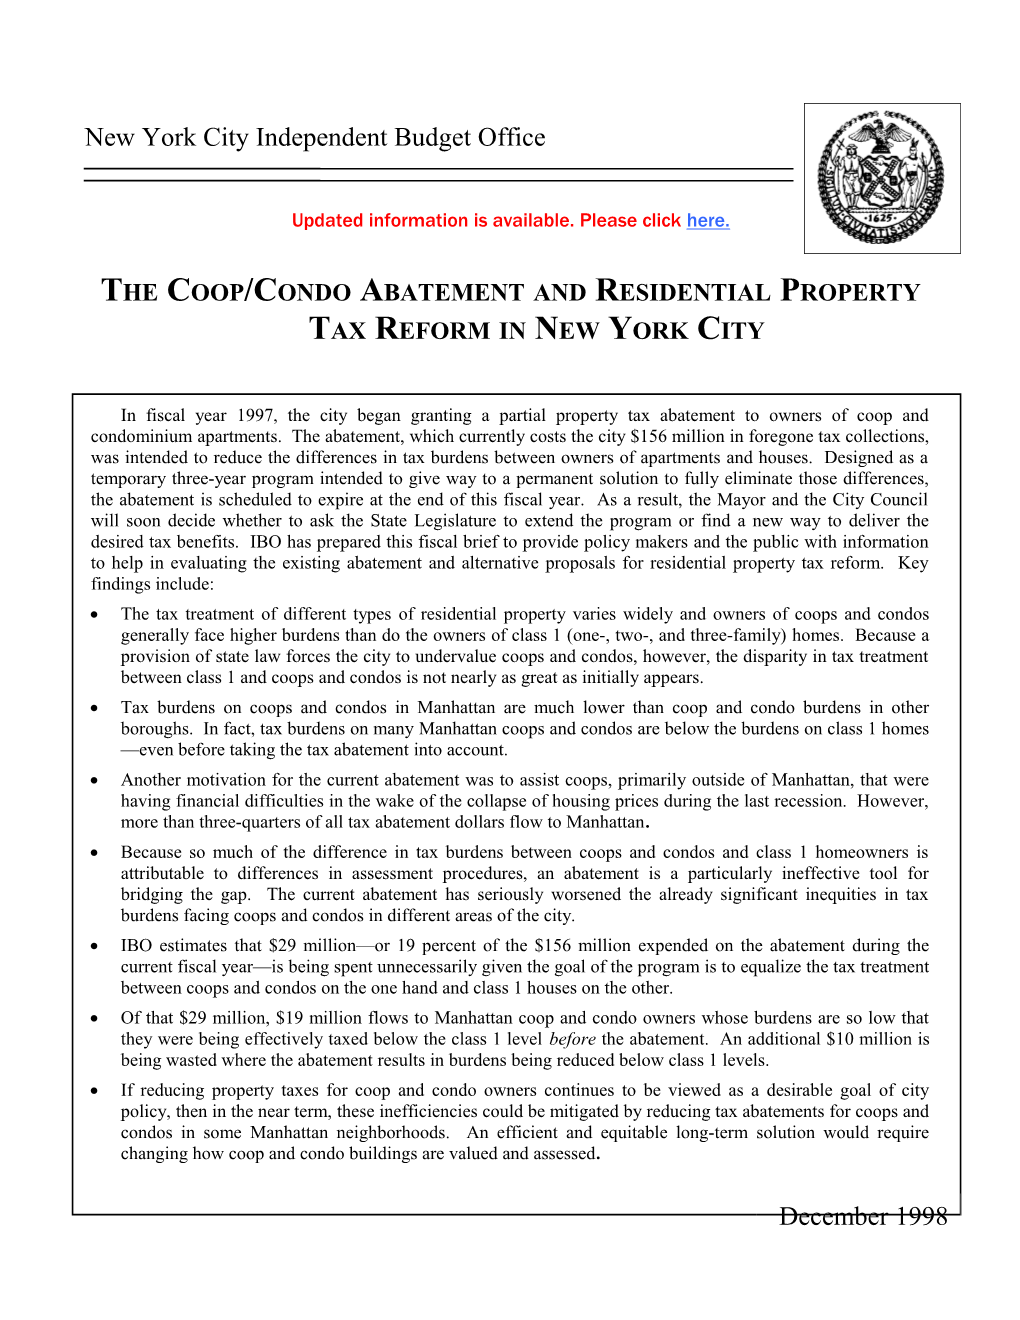 A New York City Independent Budget Office Report